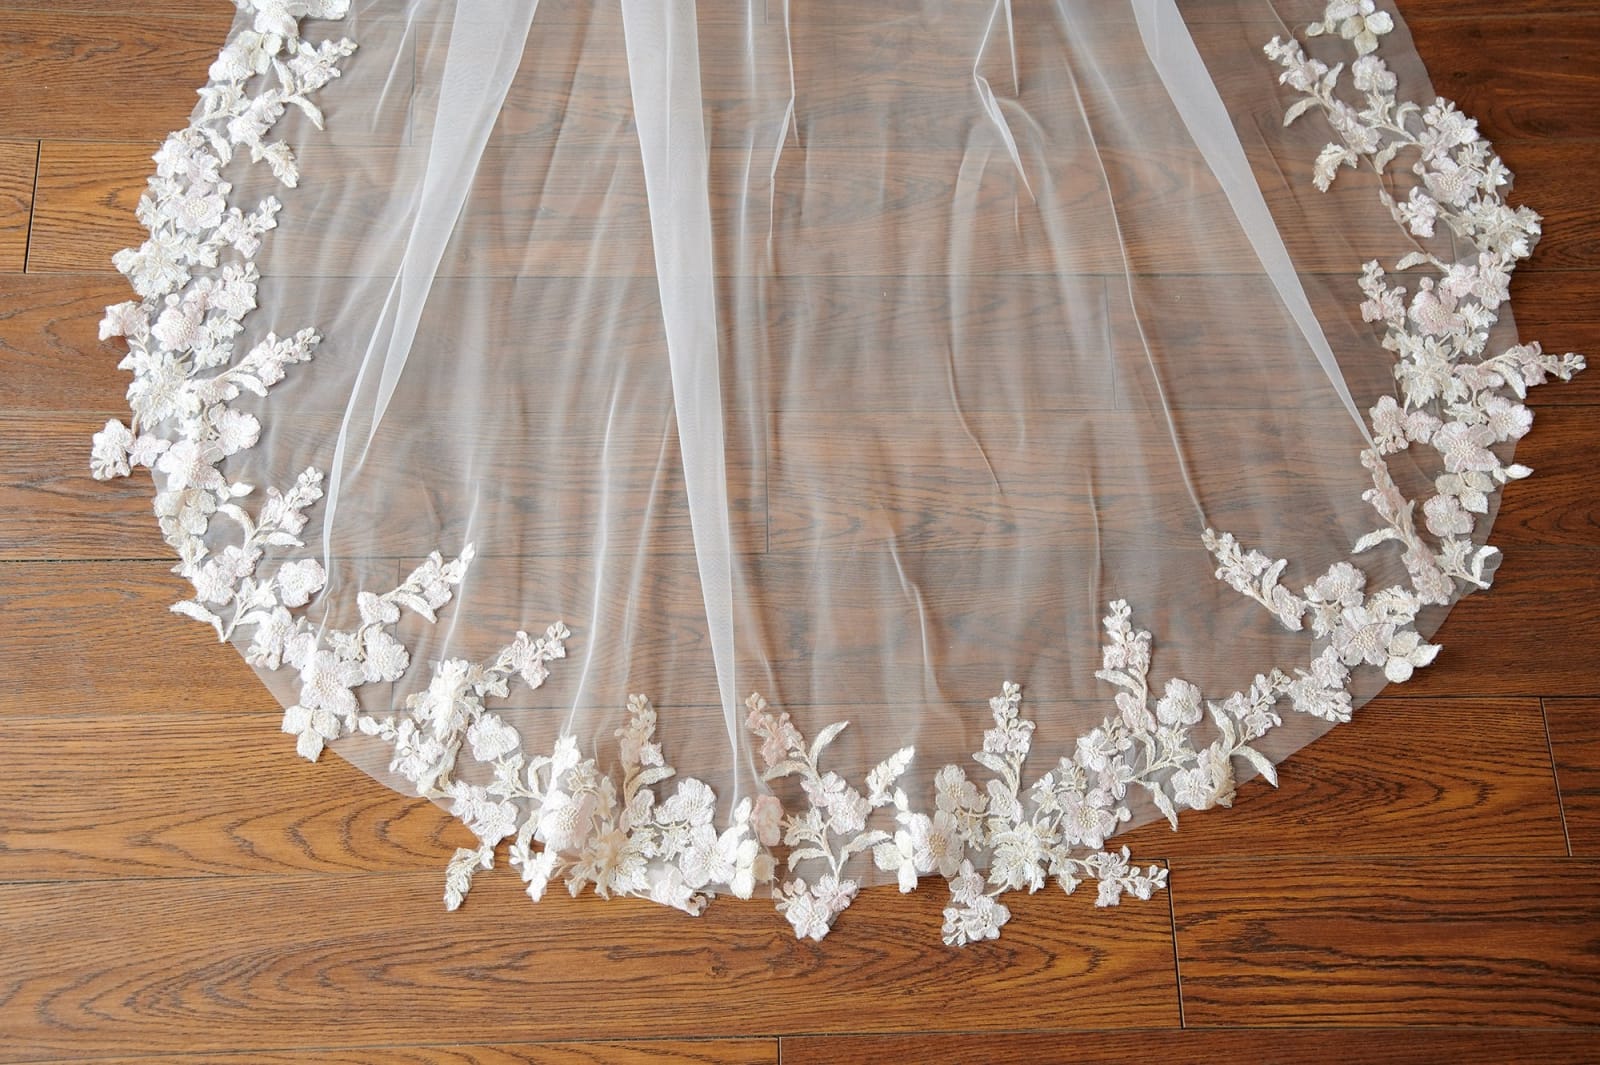 Ivory Tulle Champagne Lace Long Cathedral Wedding Bridal Veil